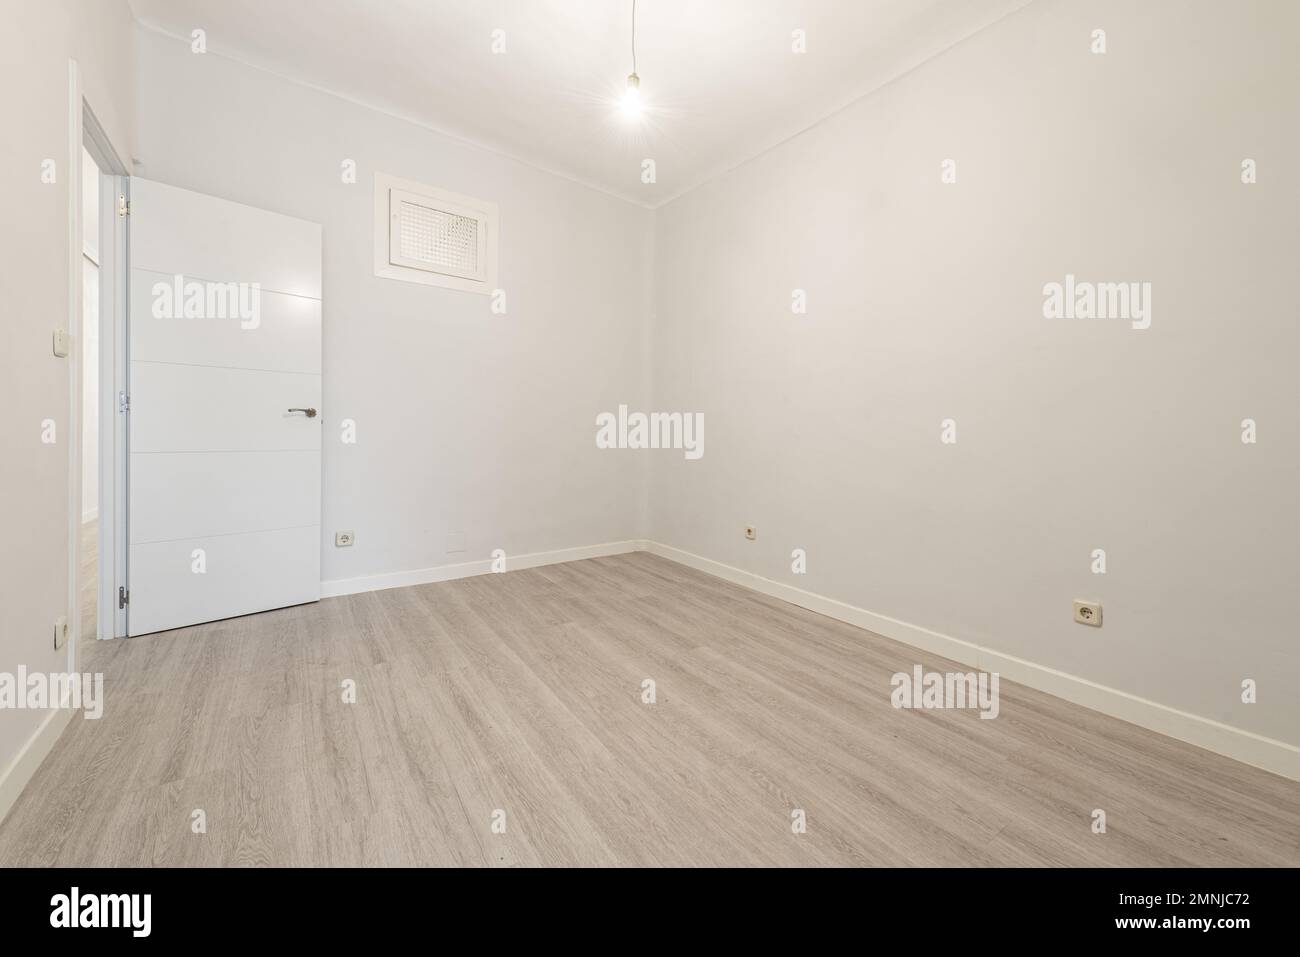 https://c8.alamy.com/comp/2MNJC72/empty-room-with-light-stoneware-floors-white-joinery-on-skirting-boards-and-doors-and-a-small-window-on-the-wall-2MNJC72.jpg